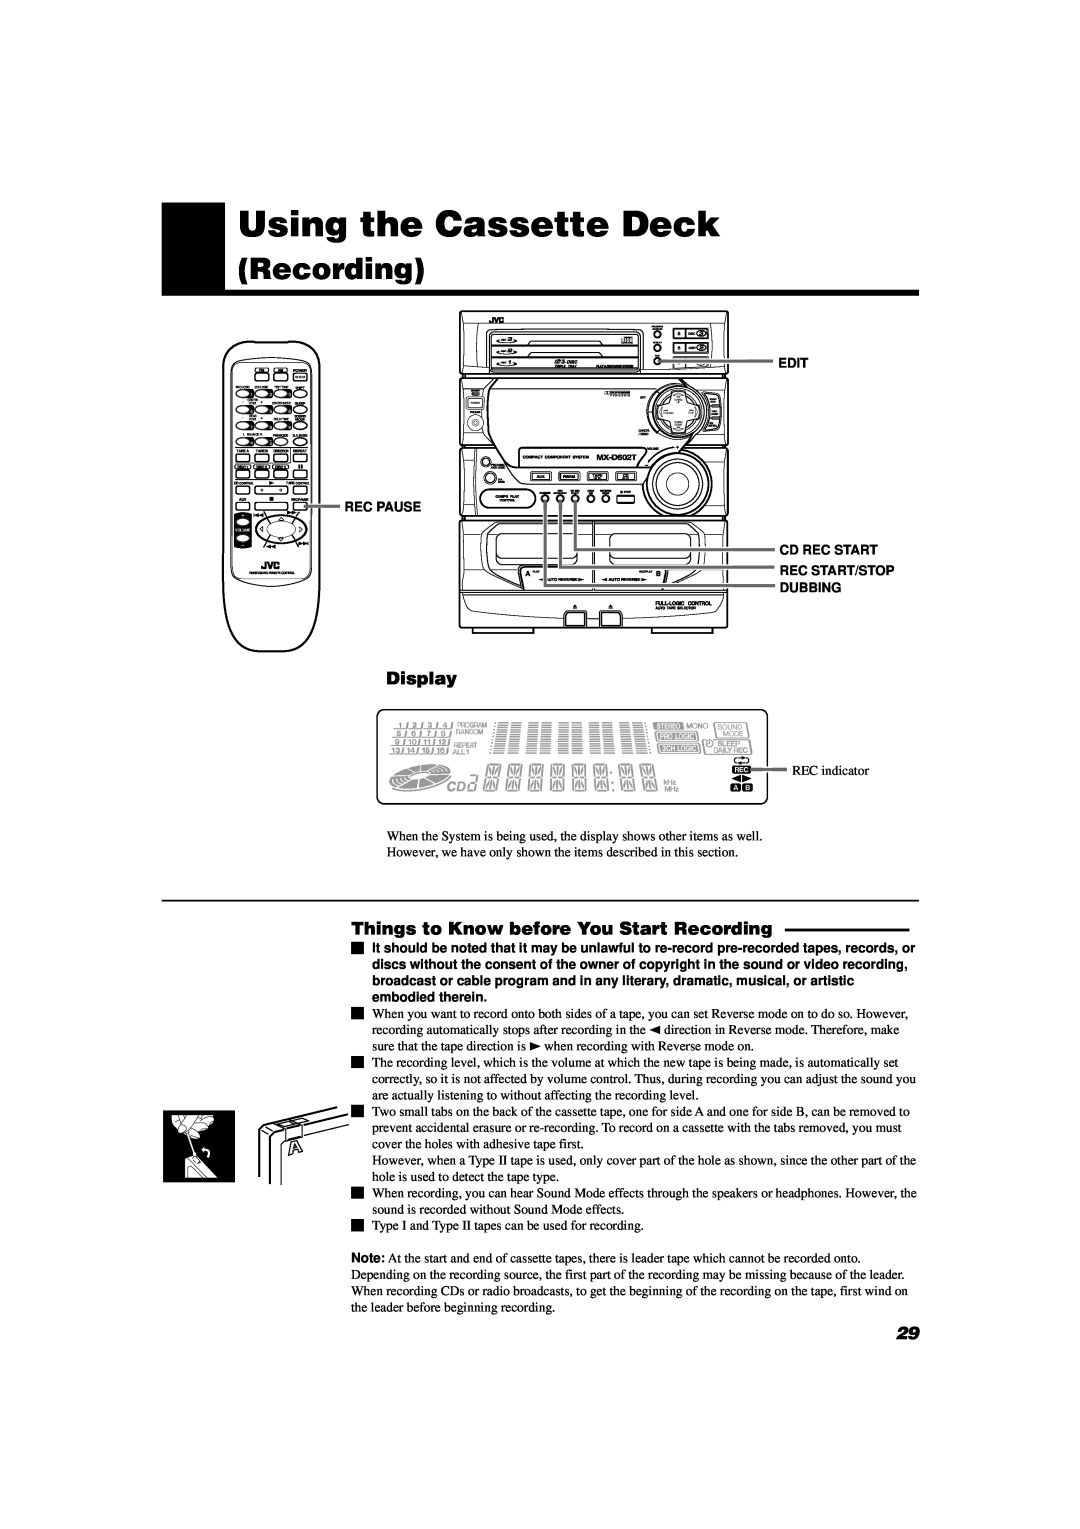 JVC MX-D602T manual Using the Cassette Deck, Display, Things to Know before You Start Recording, Rec Pause 